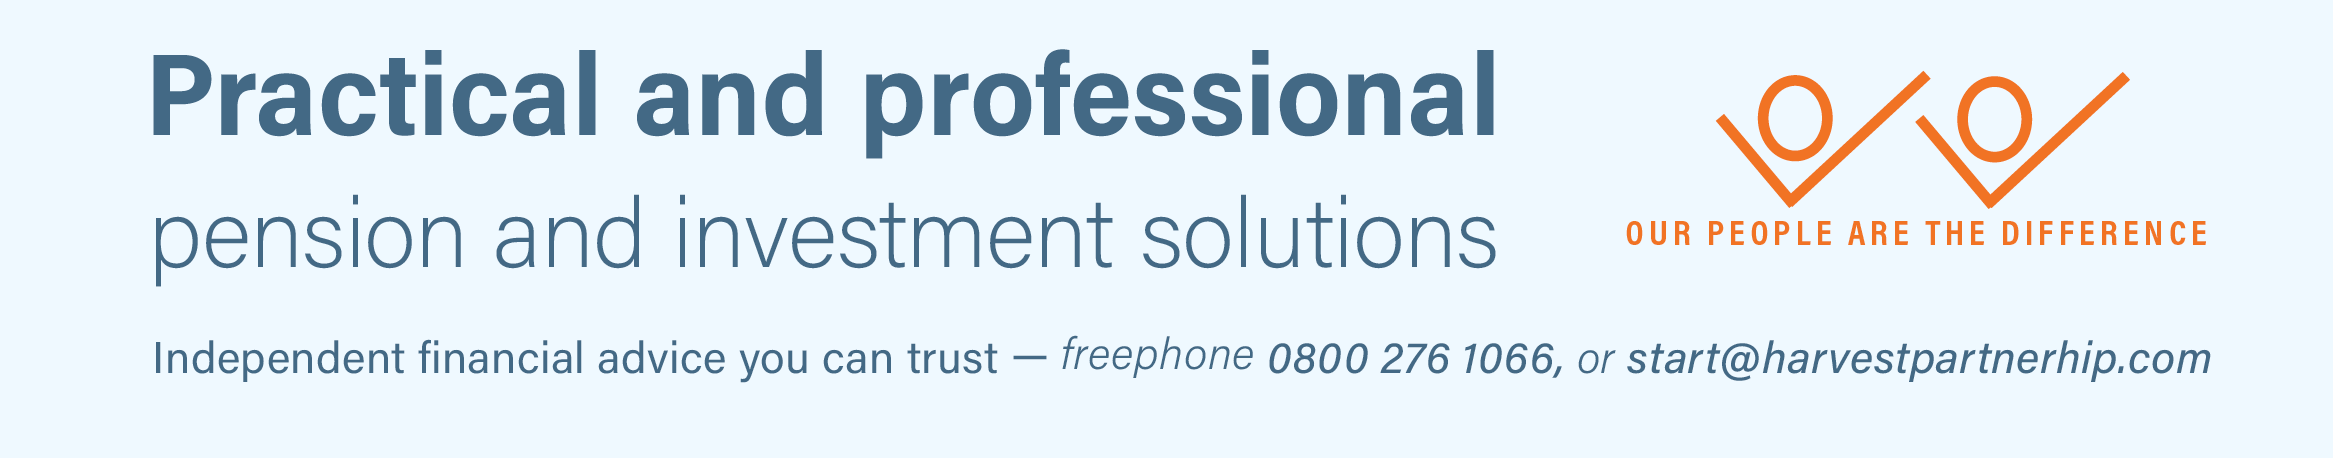 Practical and professional, pension and investment solutions. Independent financial advice you can trust — freephone 0800 276 1066, or start@harvestpartnerhip.com. There is then a graphic showing two stylised figures with the caption, Our people are the difference.